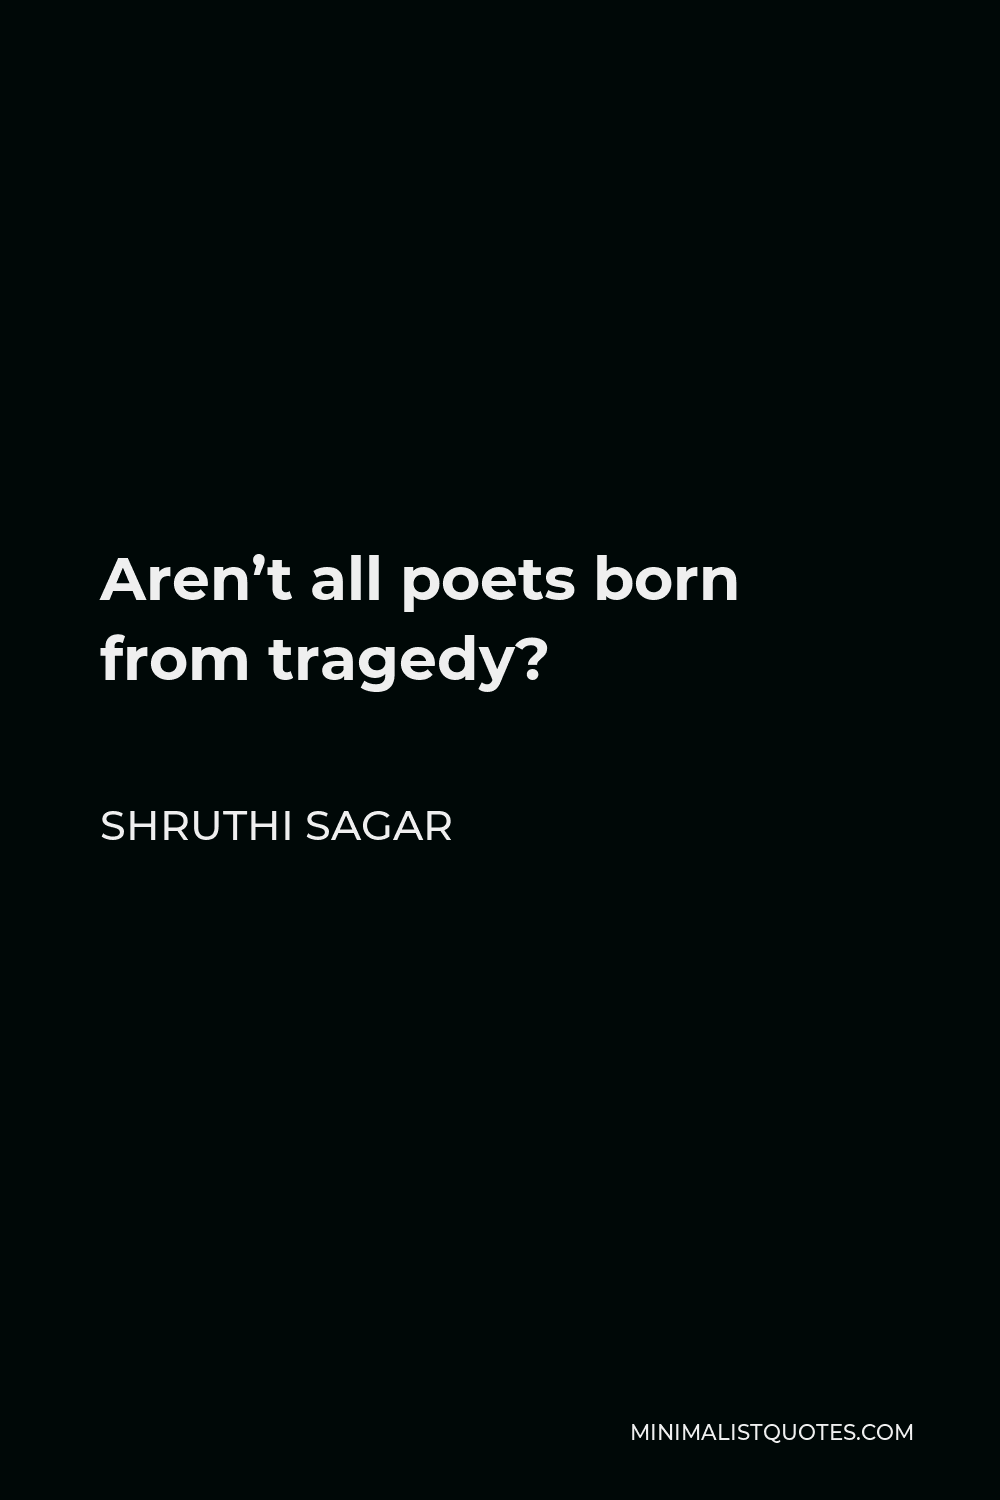 Shruthi Sagar Quote - Aren’t all poets born from tragedy?